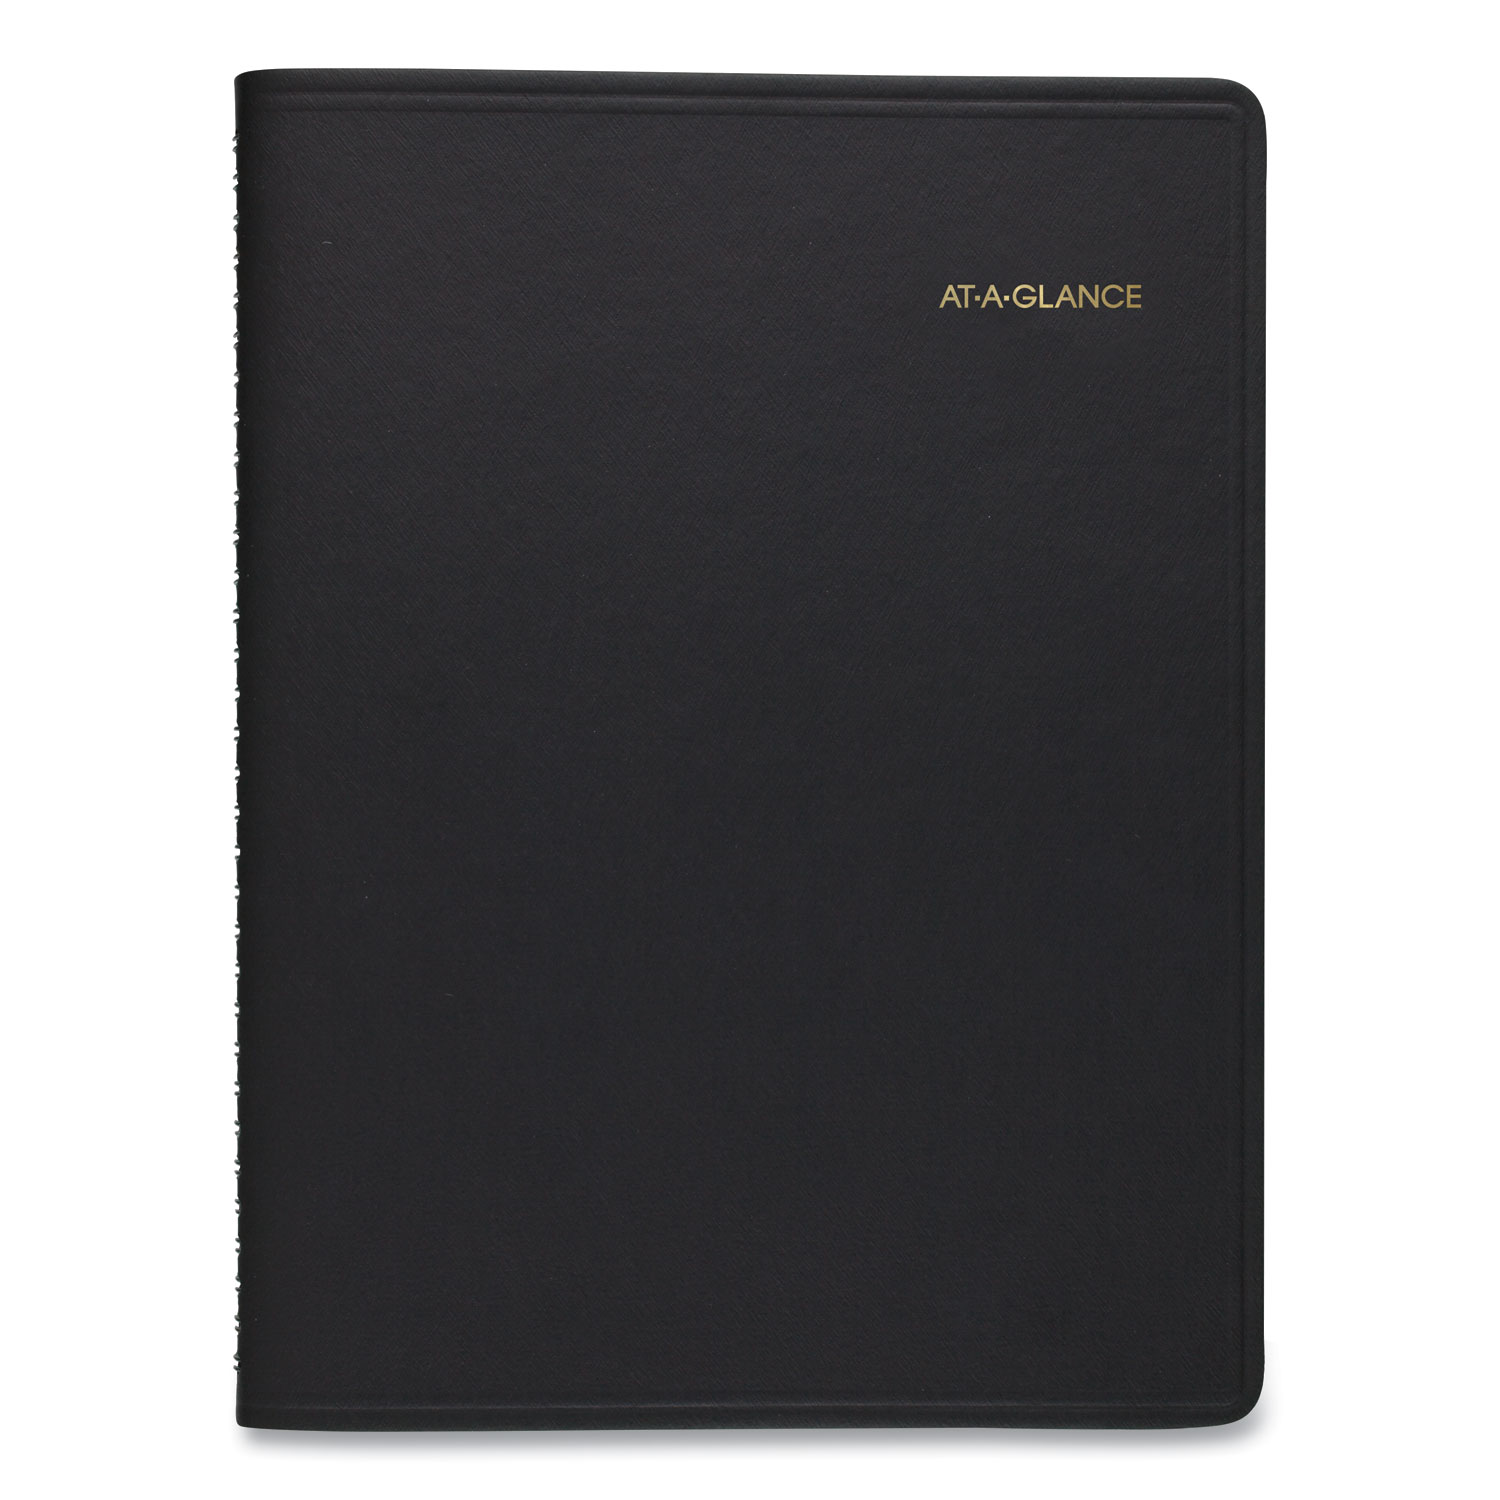  AT-A-GLANCE 7095005 Weekly Appointment Book, 10 7/8 x 8 1/4, Black, 2020-2021 (AAG7095005) 